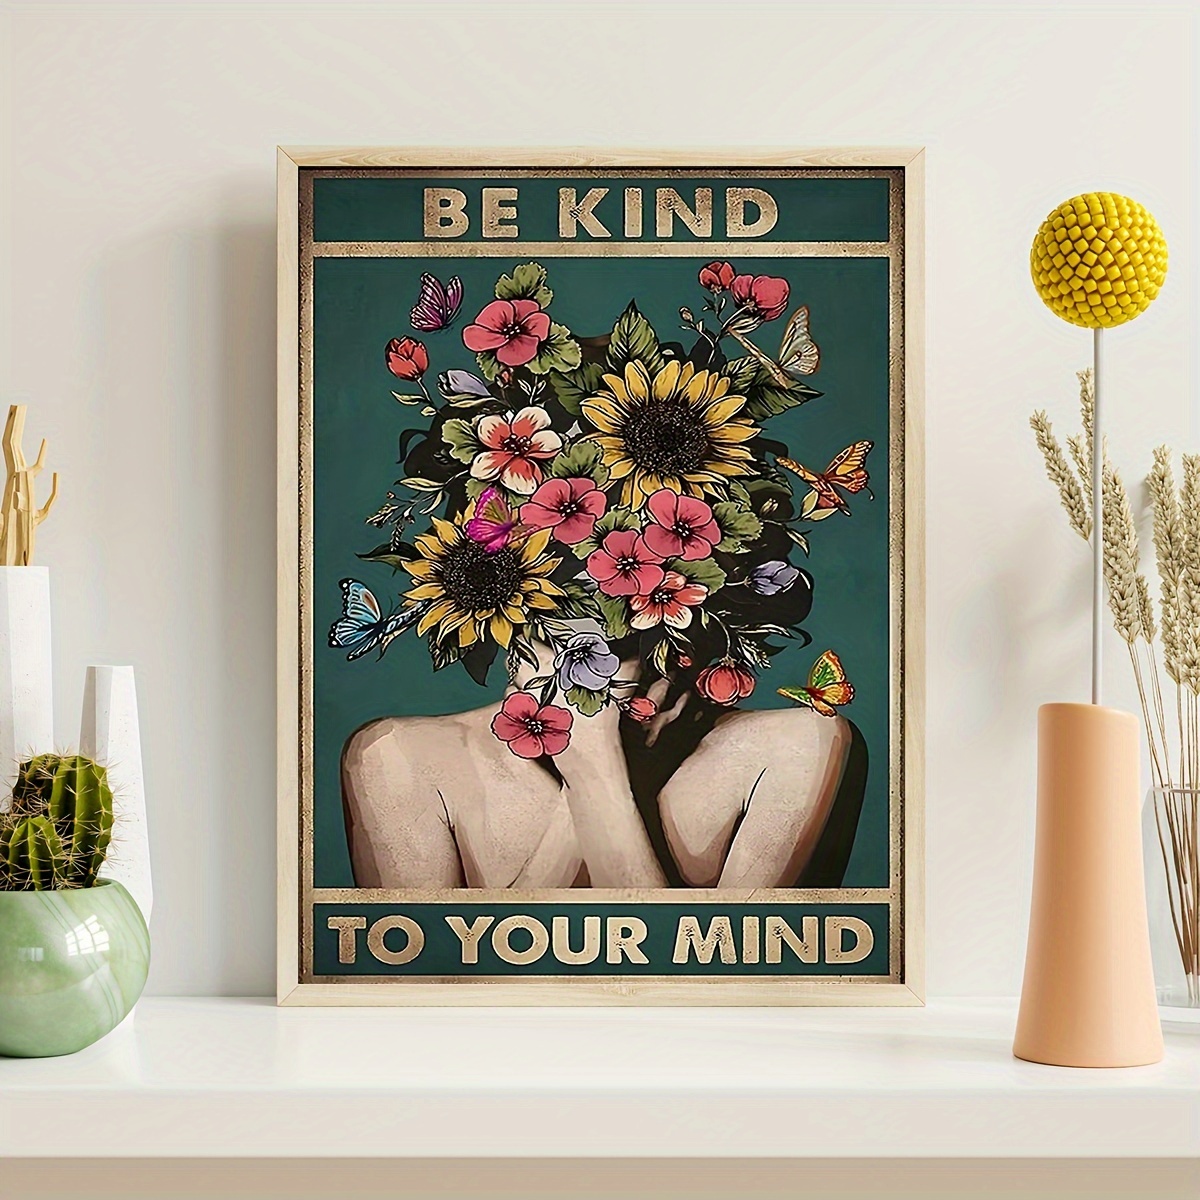 

1pc Be Kind To Your Mind Canvas Wall Art Decor, Retro Girl Flower Wall Decoration Poster For Home Office Hotel Living Room Bedroom Decoration, Best Gifts, Frameless And Framed